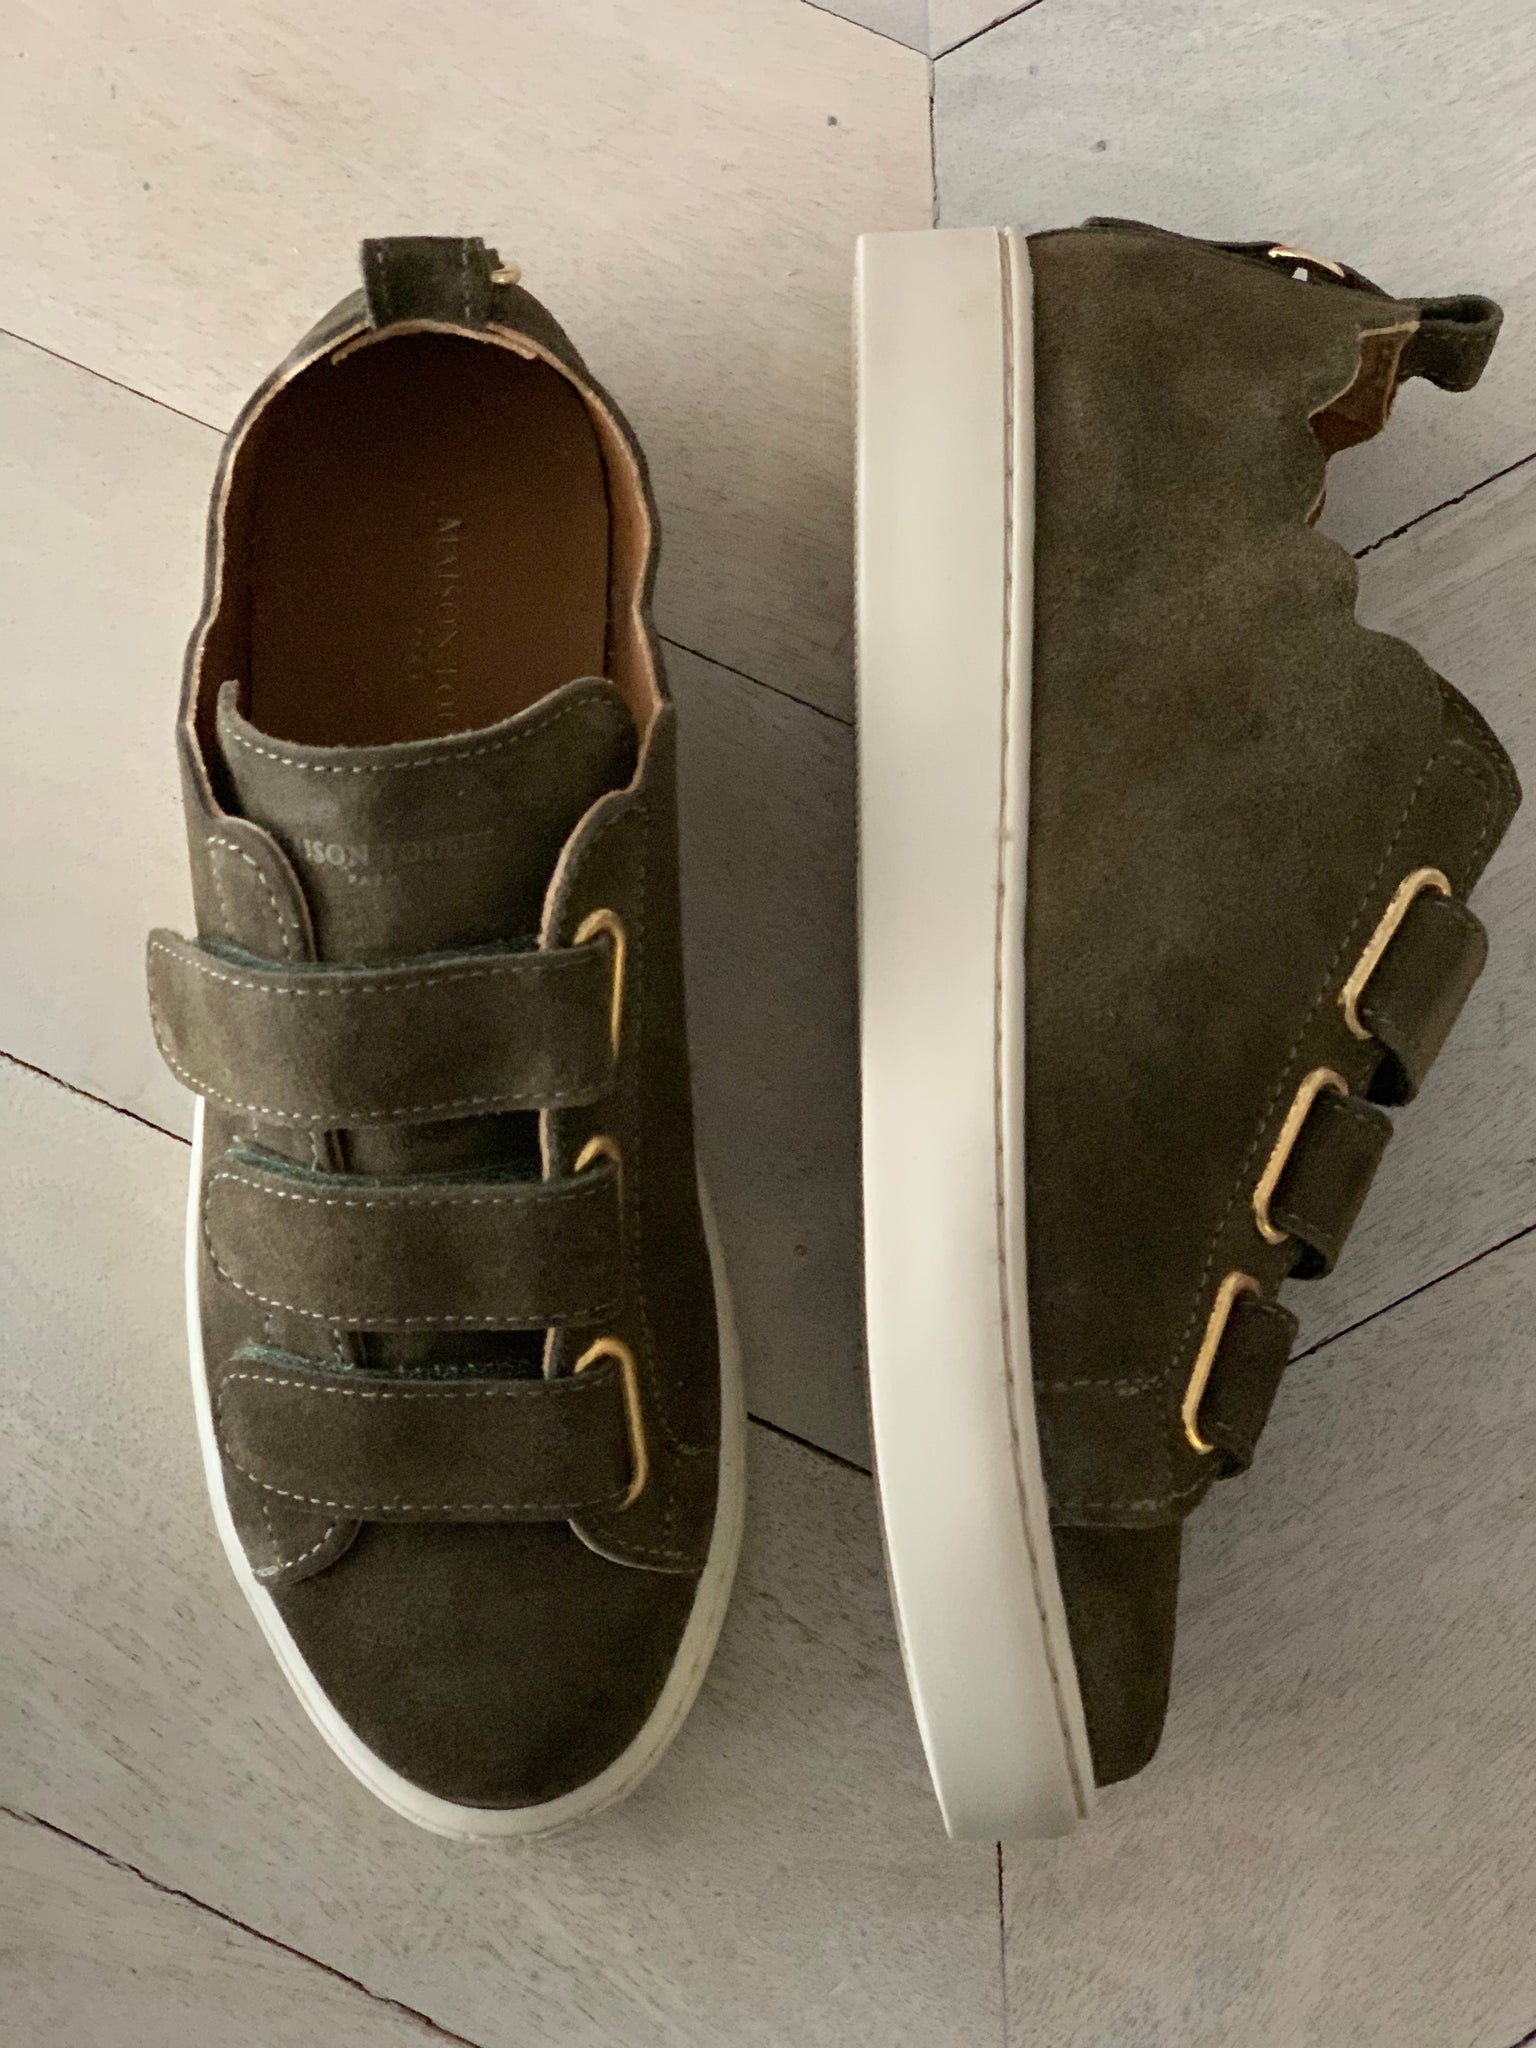 Maison Toufet Julianne Scallop Olive Green Velcro Sneakers - MADE THE EDIT